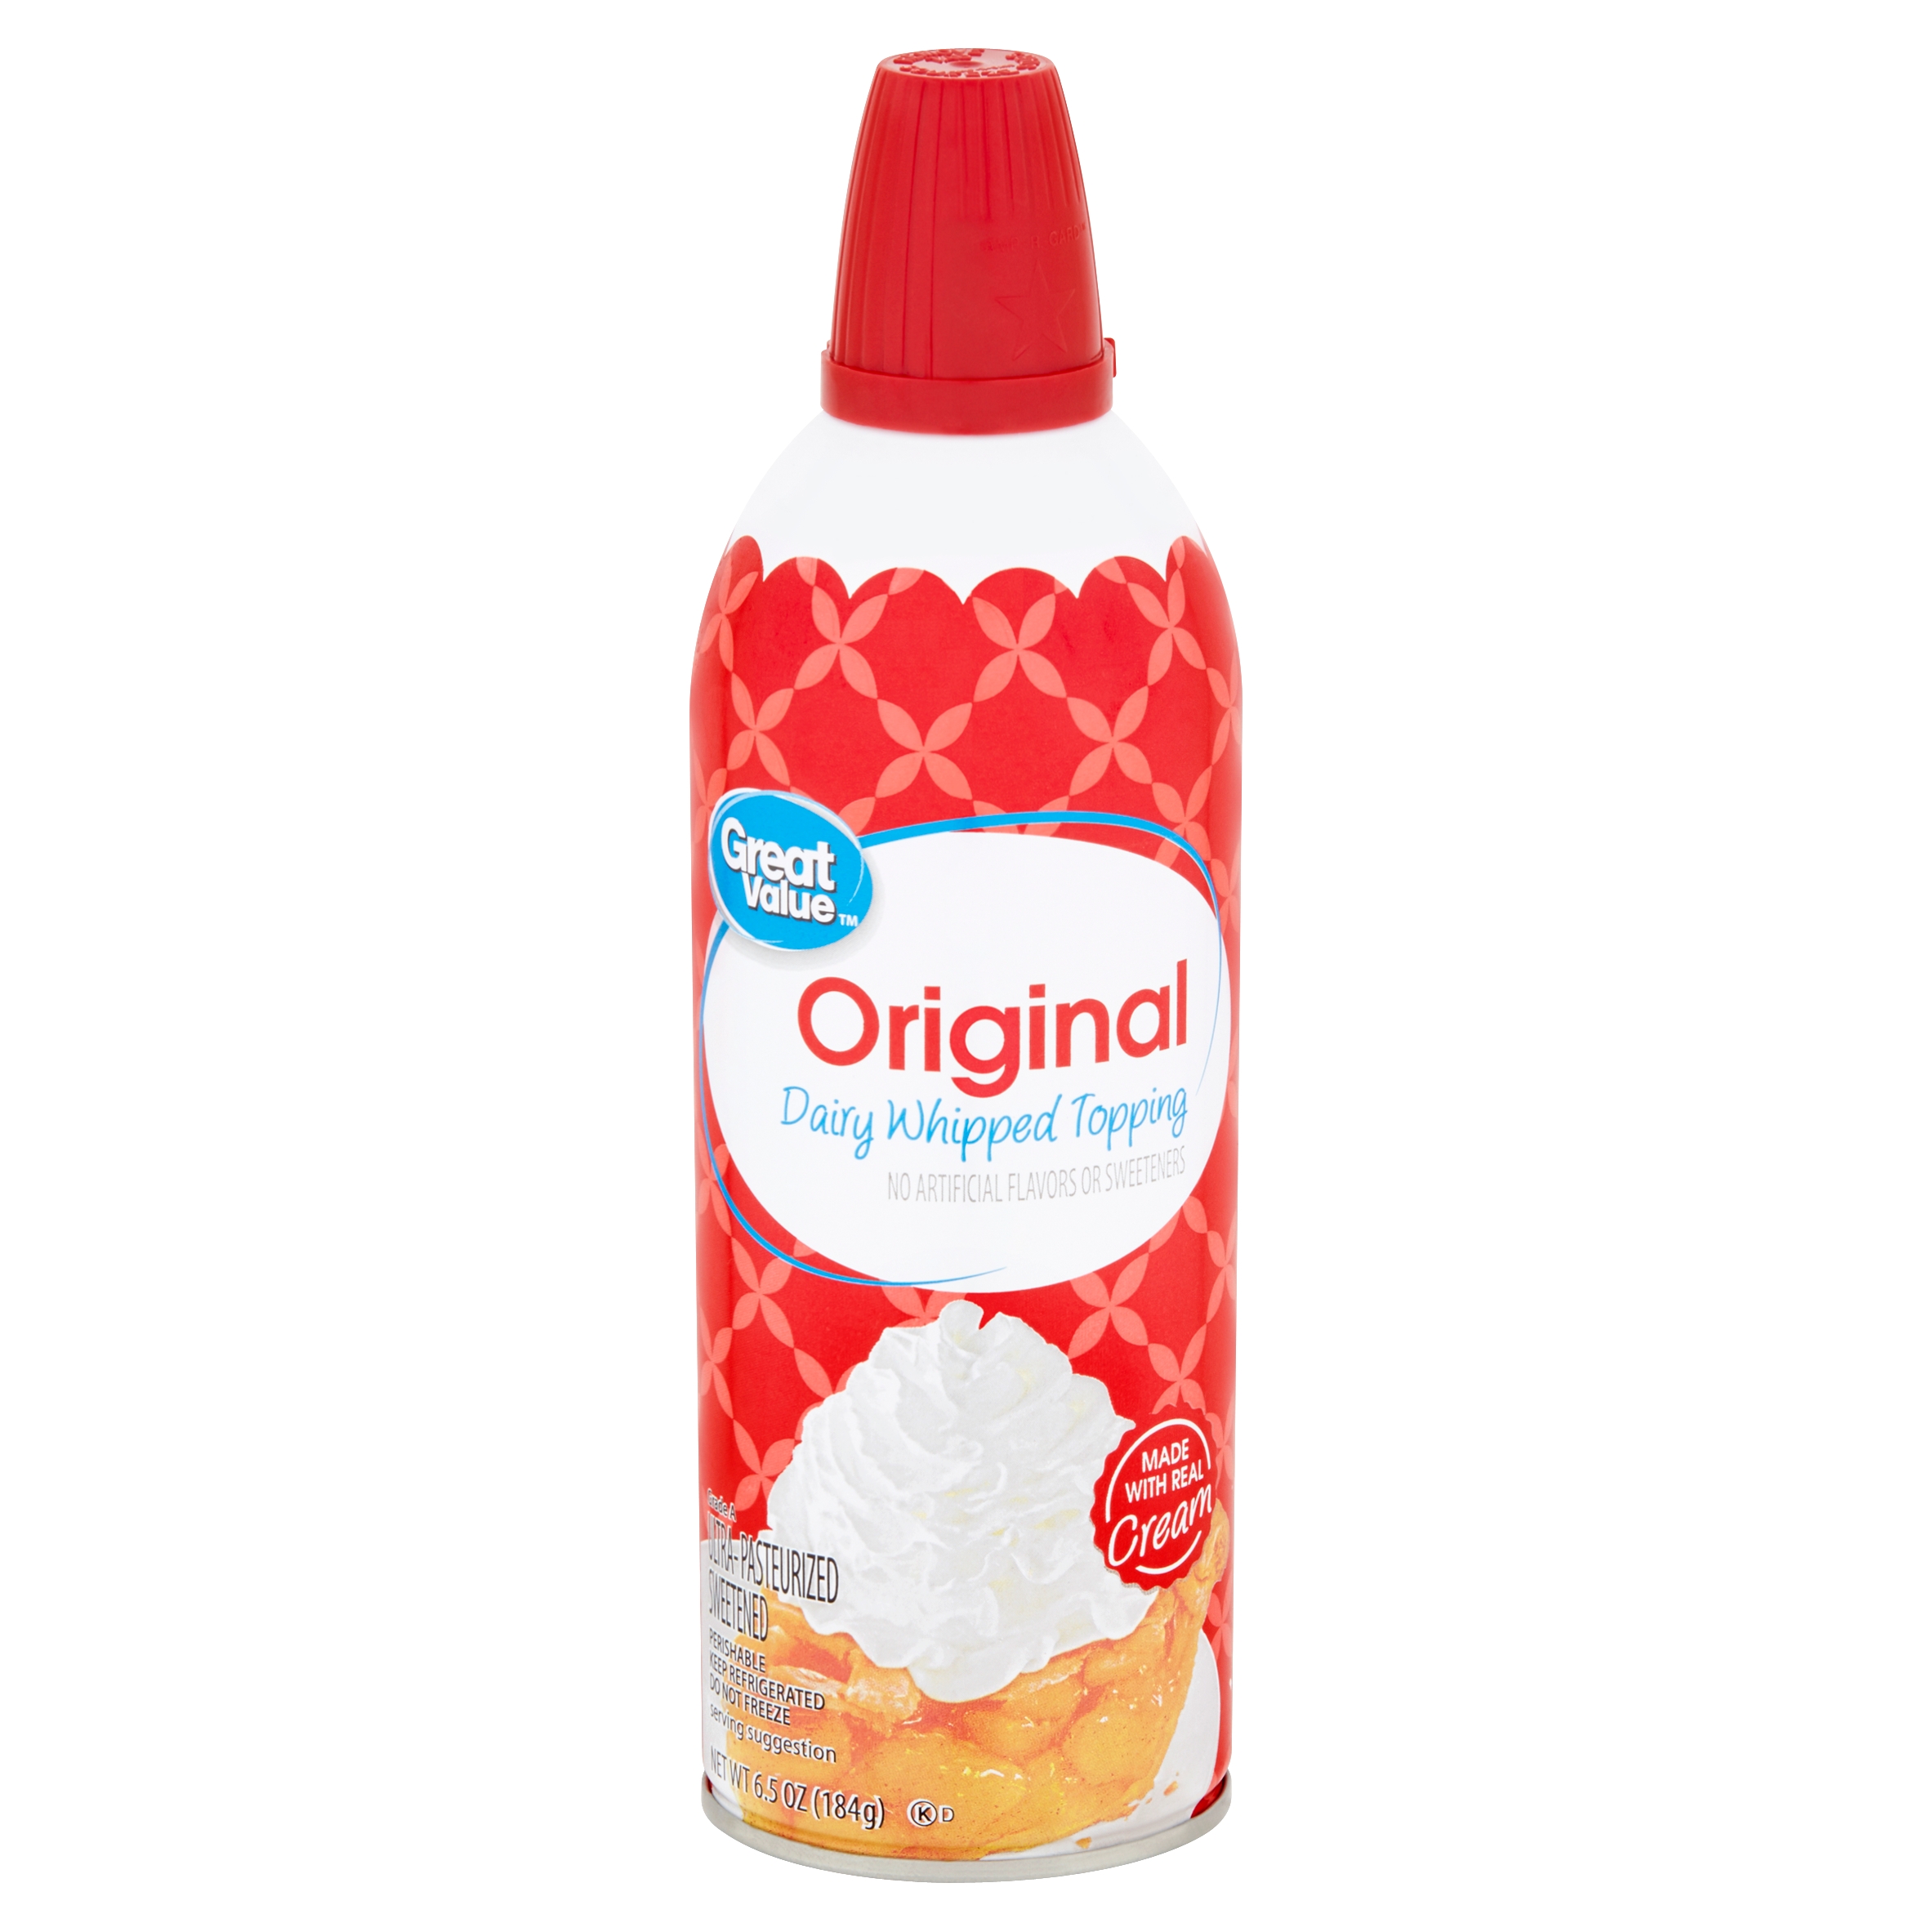 Great Value Original Dairy Whipped Topping, 6.5 Oz